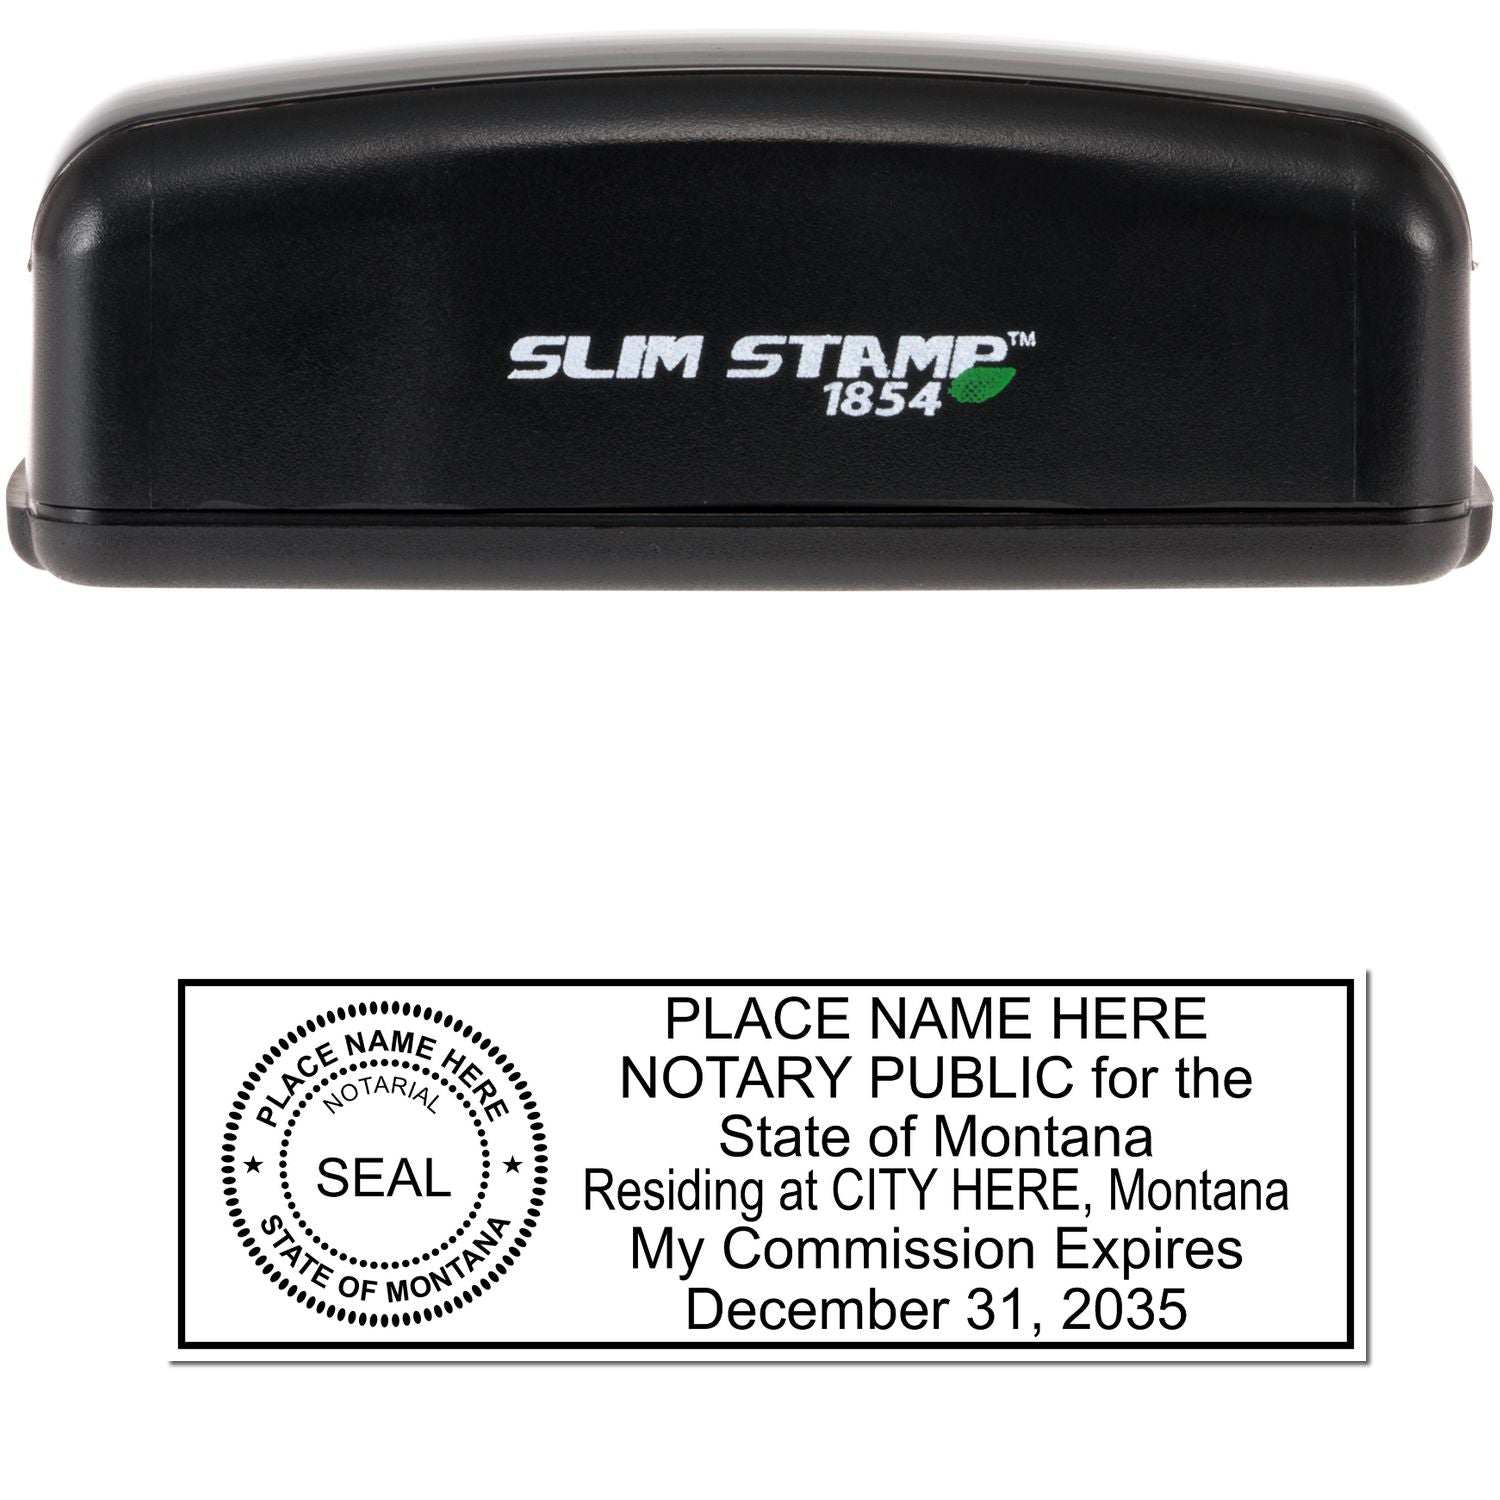 The main image for the Slim Pre-Inked State Seal Notary Stamp for Montana depicting a sample of the imprint and electronic files